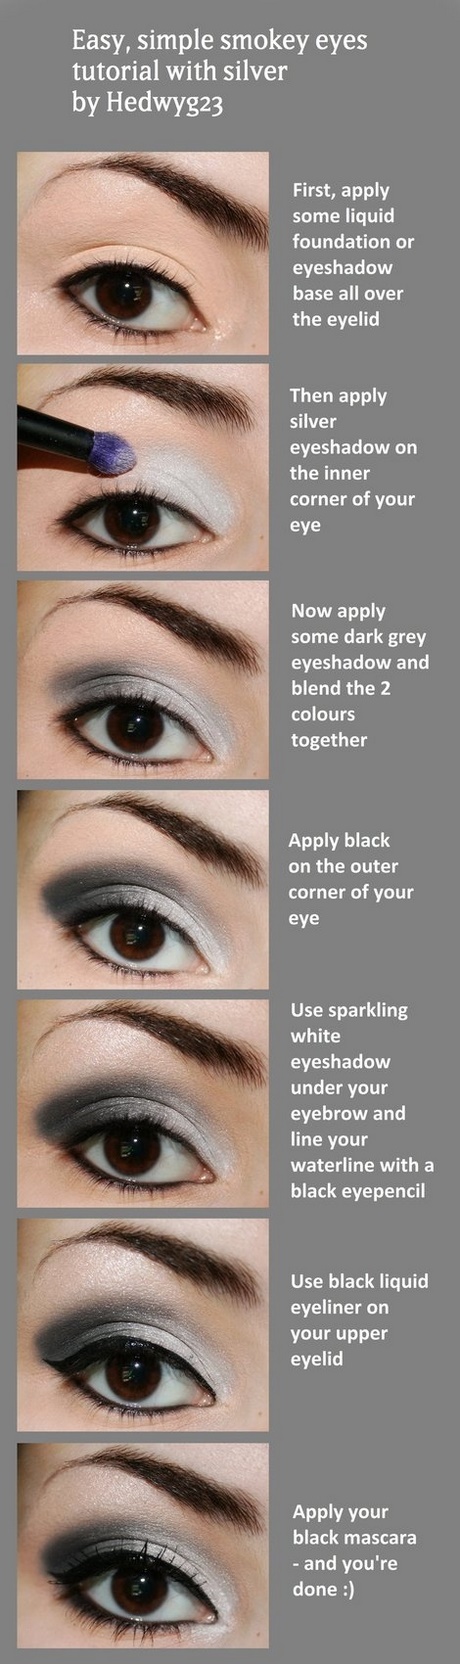 makeup-tutorial-with-pictures-15_4 Make-up les met foto  s